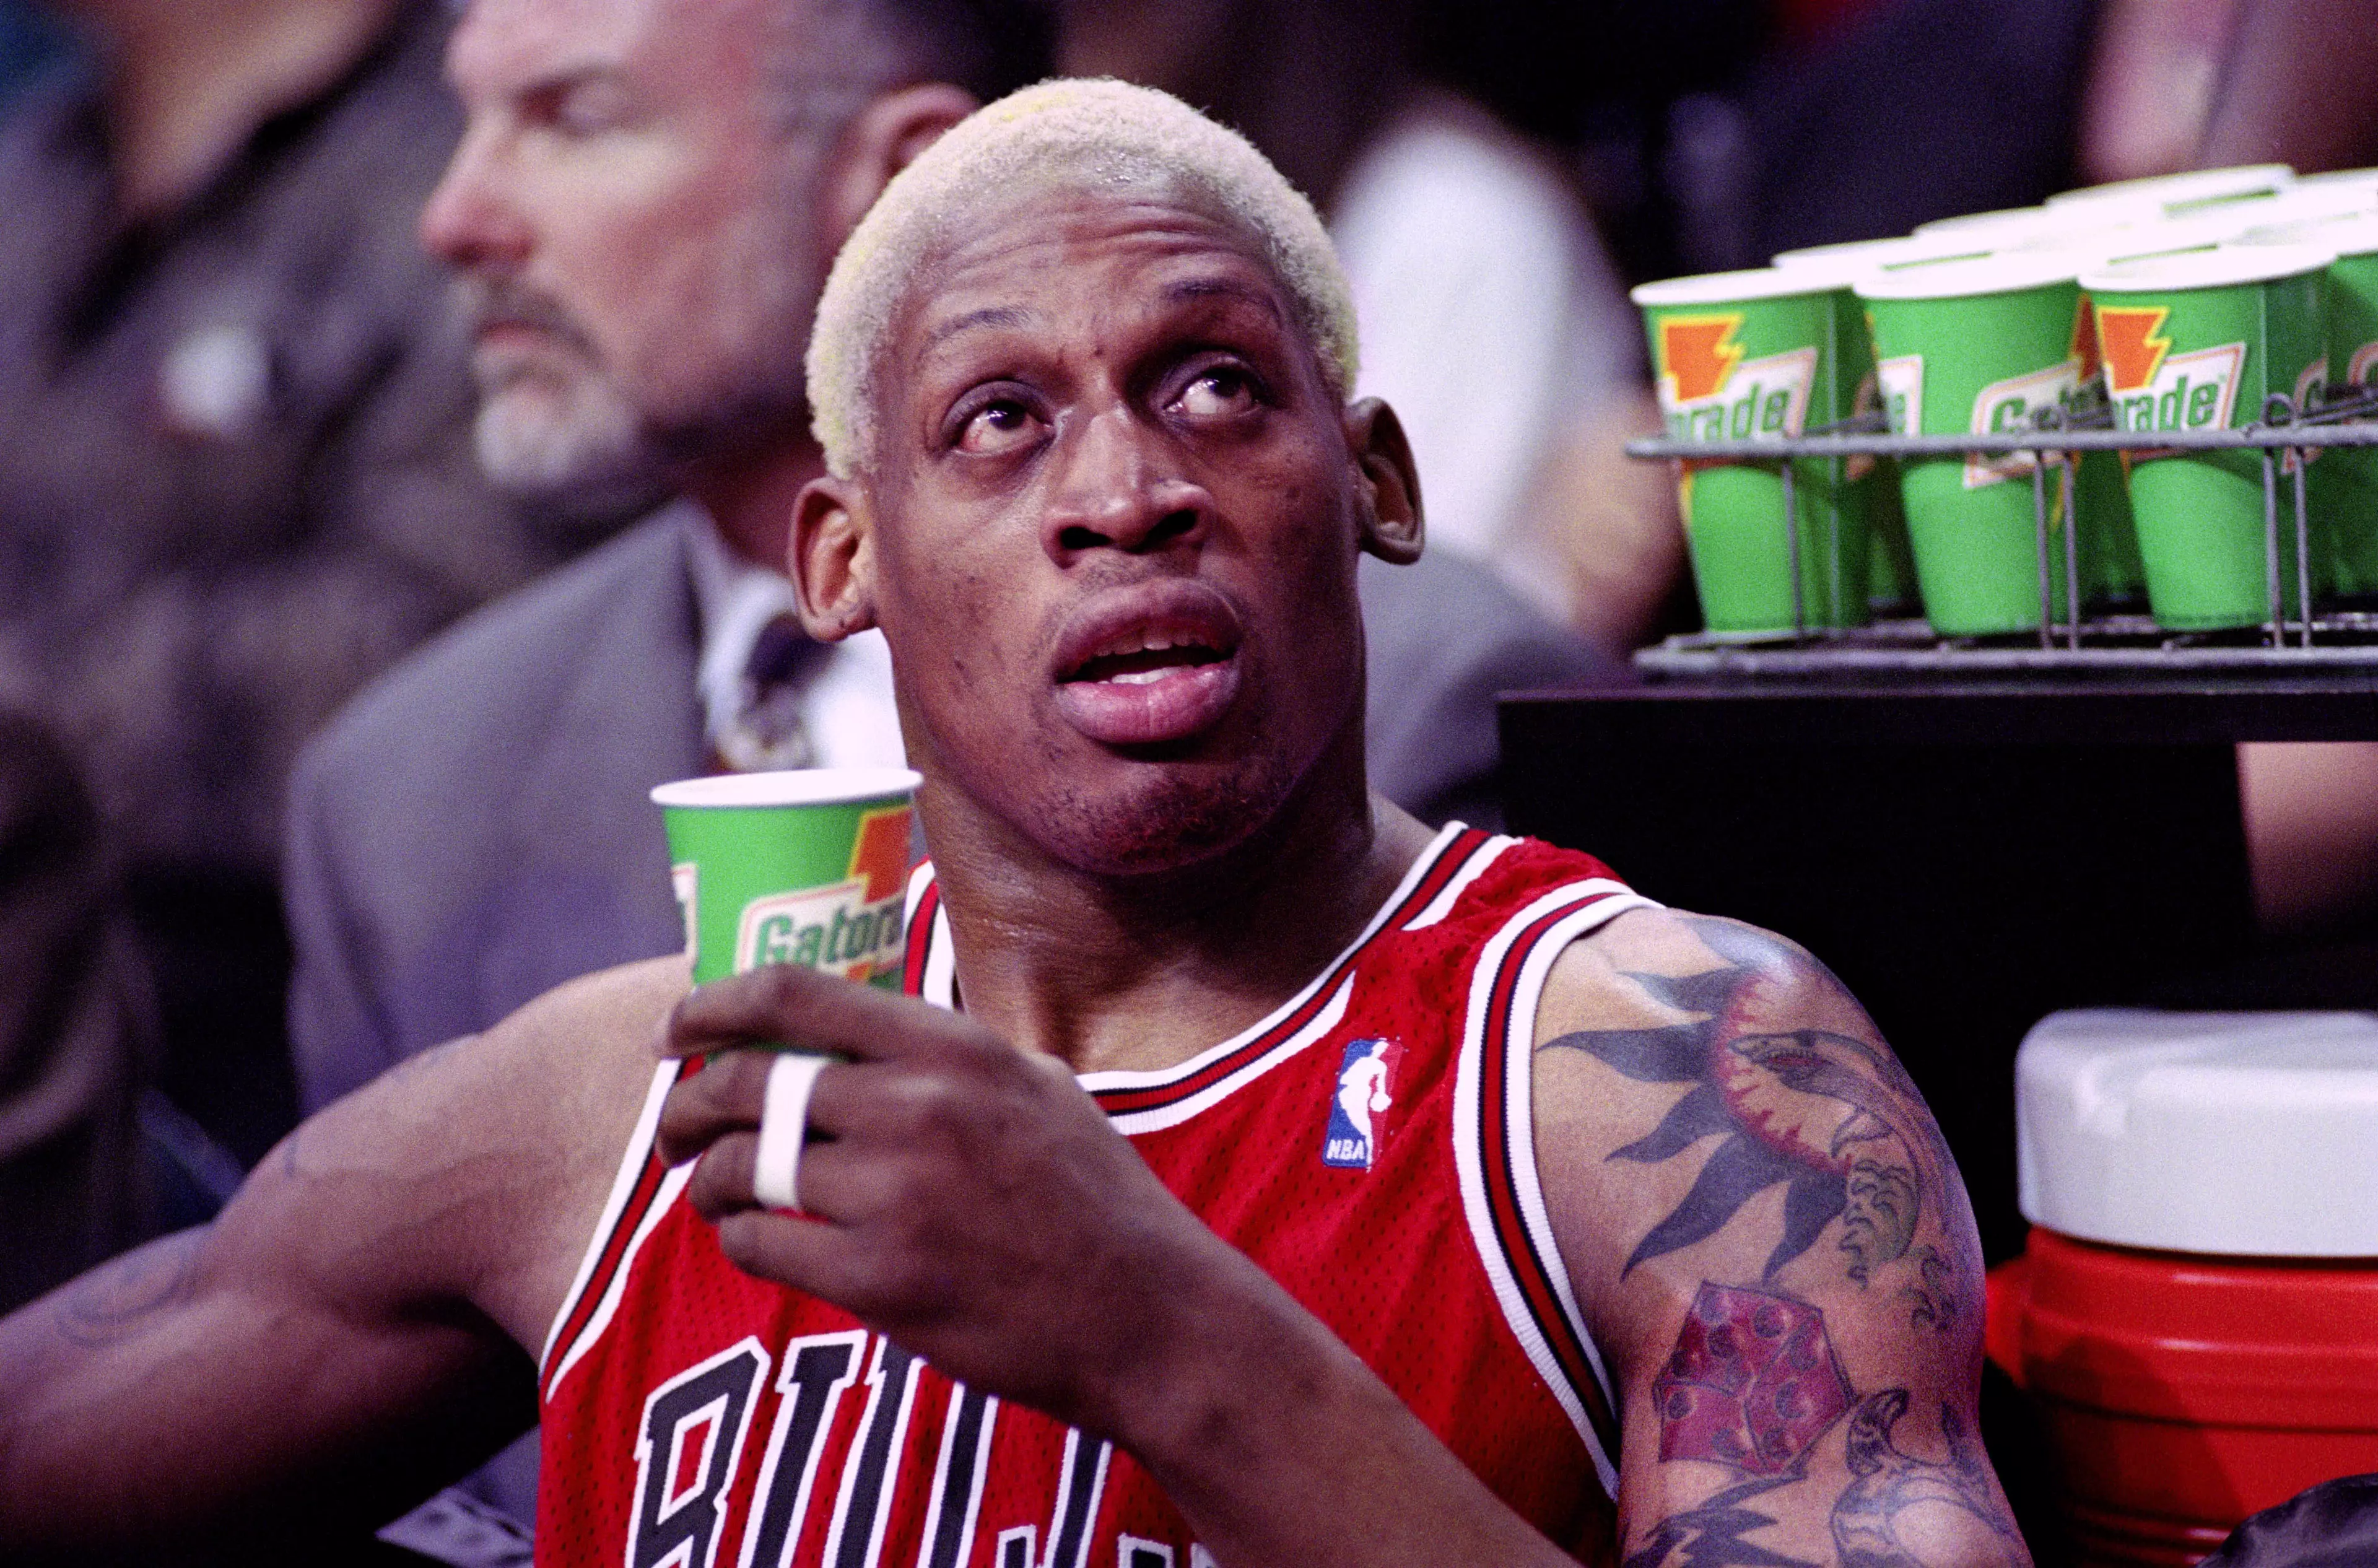 Dennis Rodman in 1996 during a break from a Chicago Bulls' game.